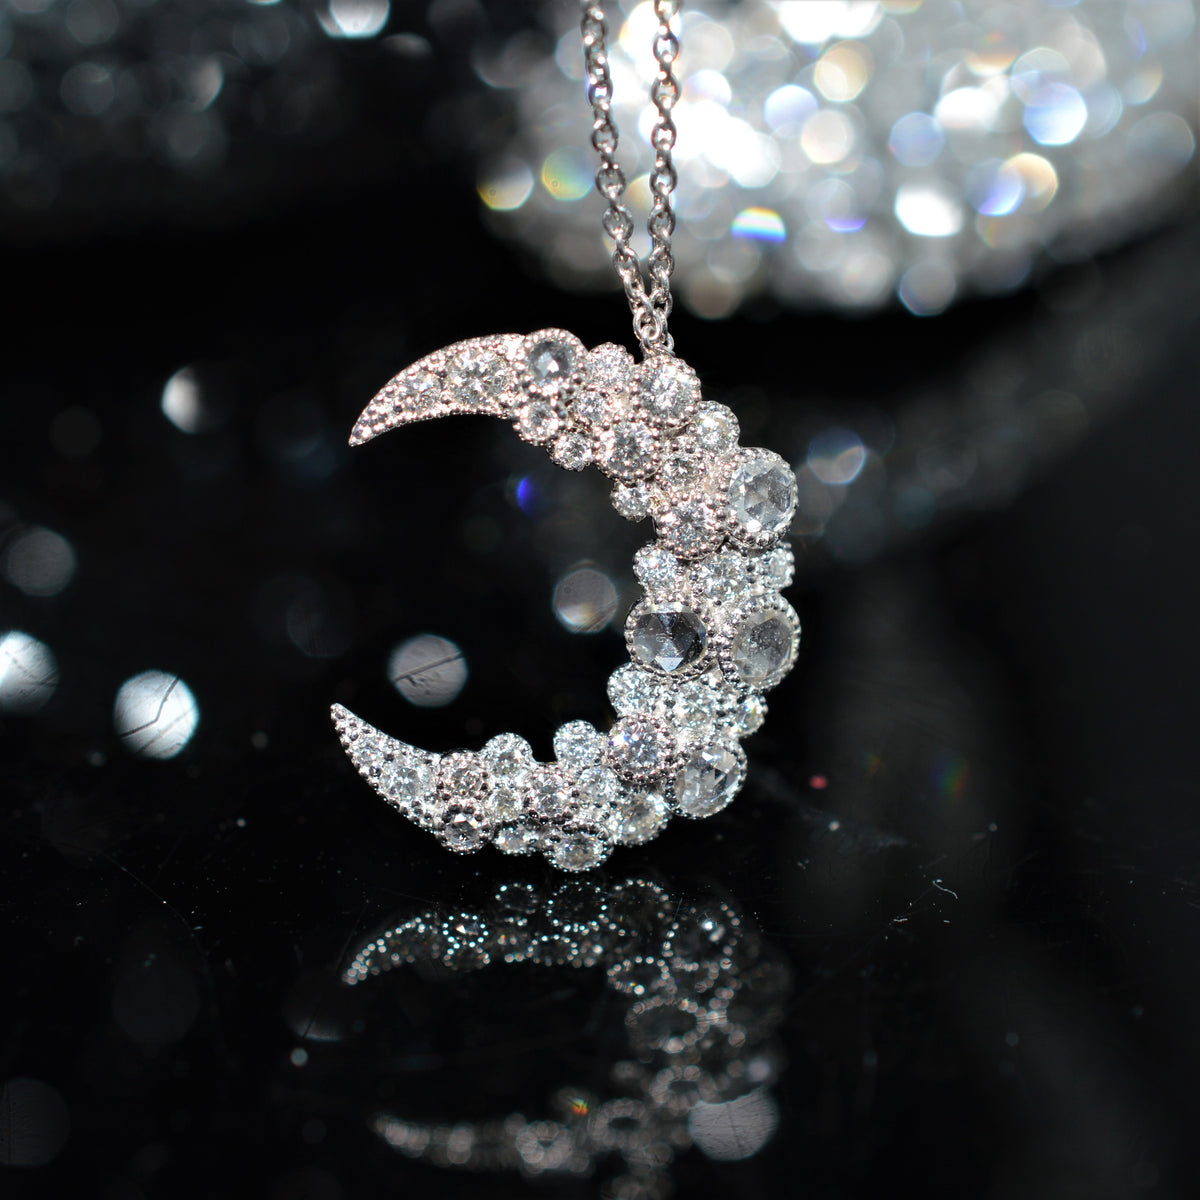 18K White Gold Crescent Moon Diamond Necklace by Vivaan